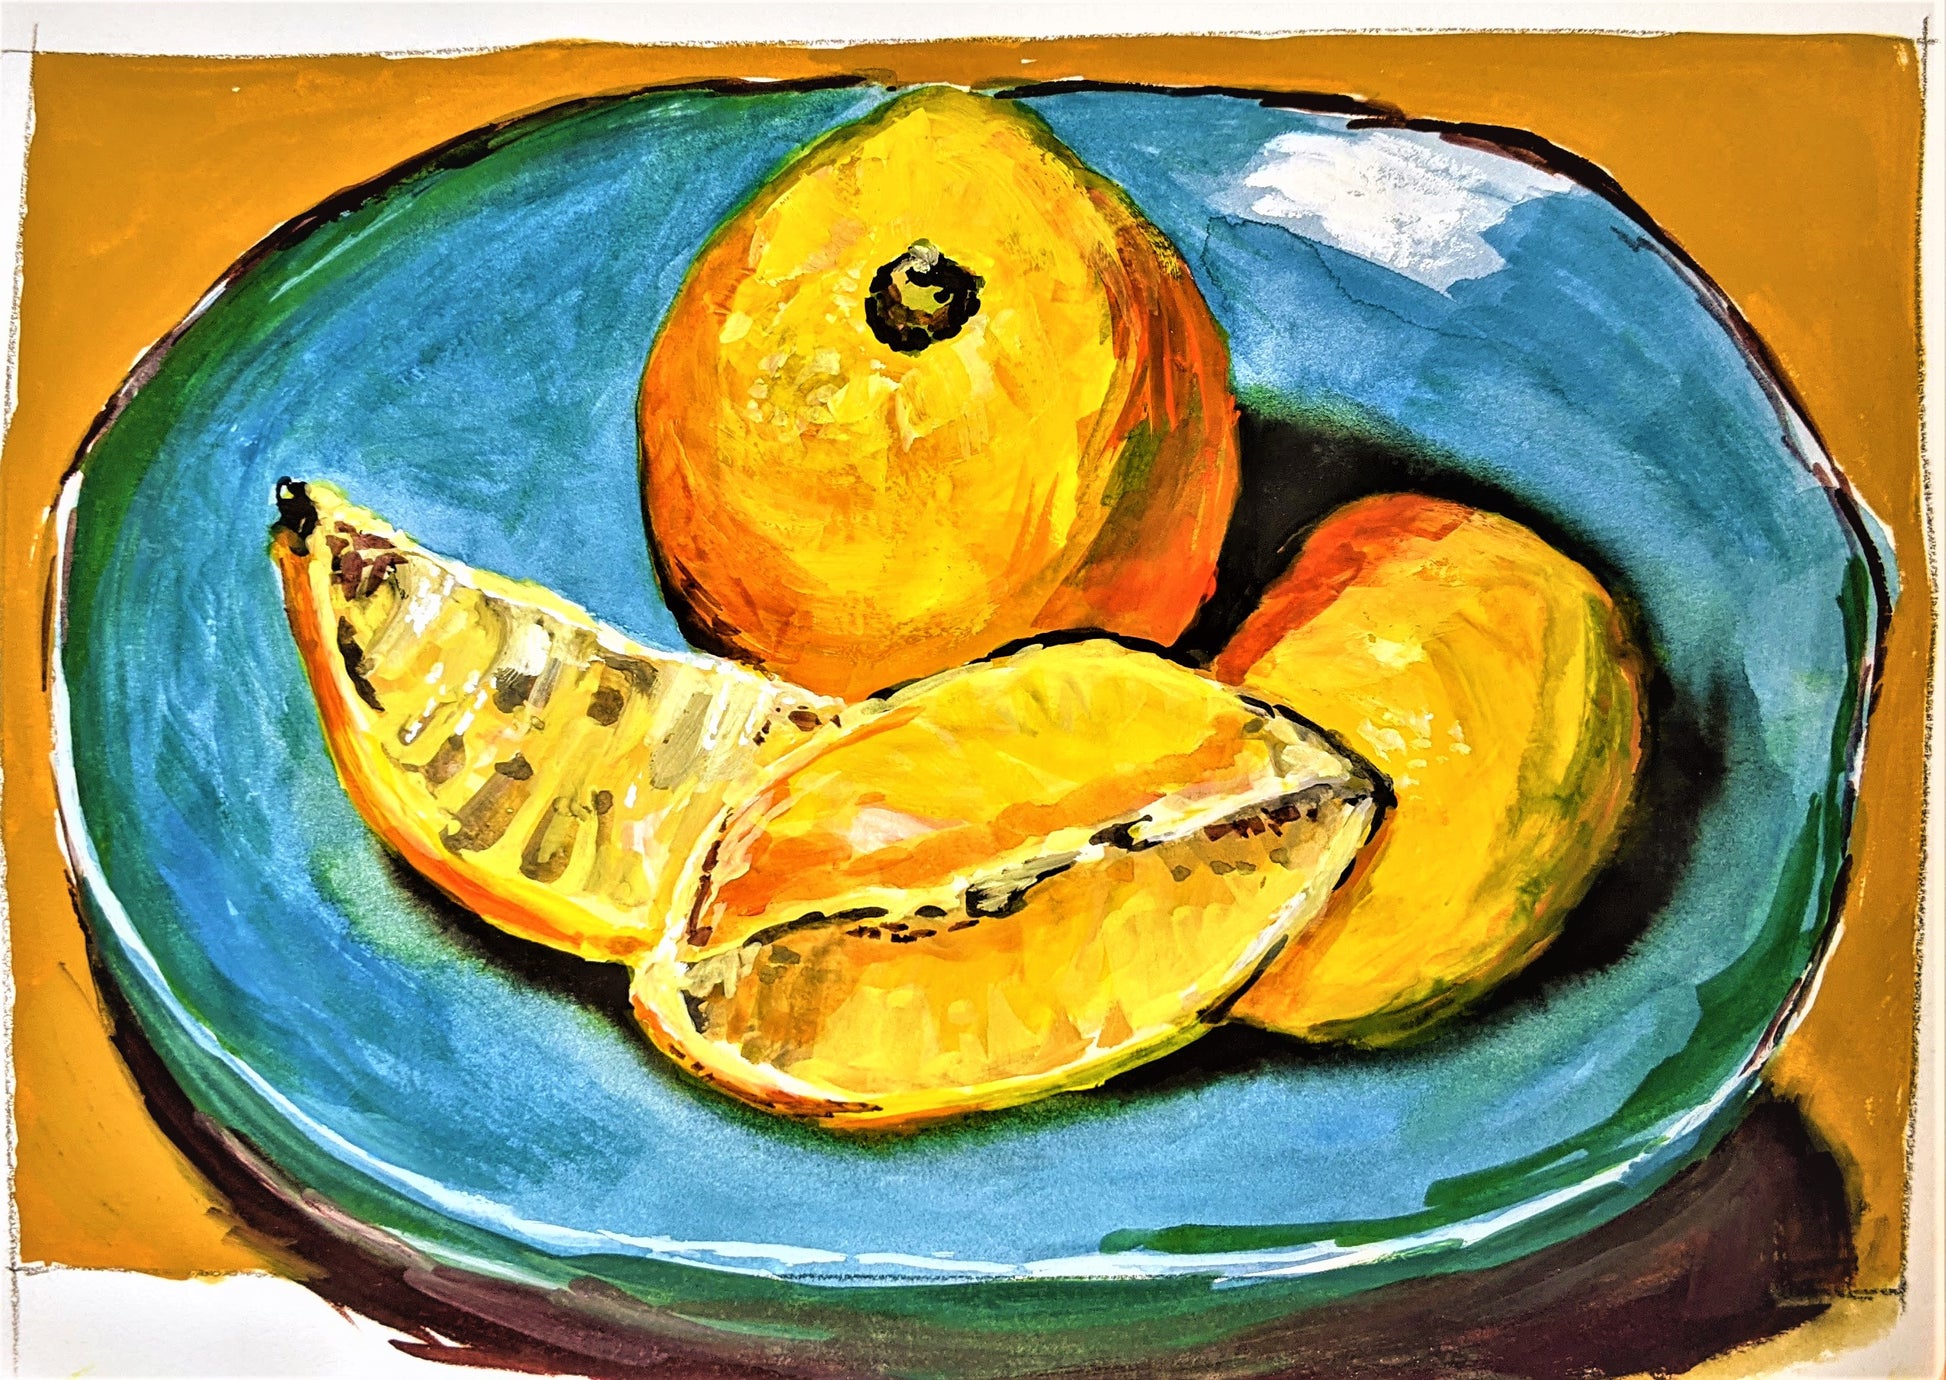 Lemons on Turquoise gouache painting on paper